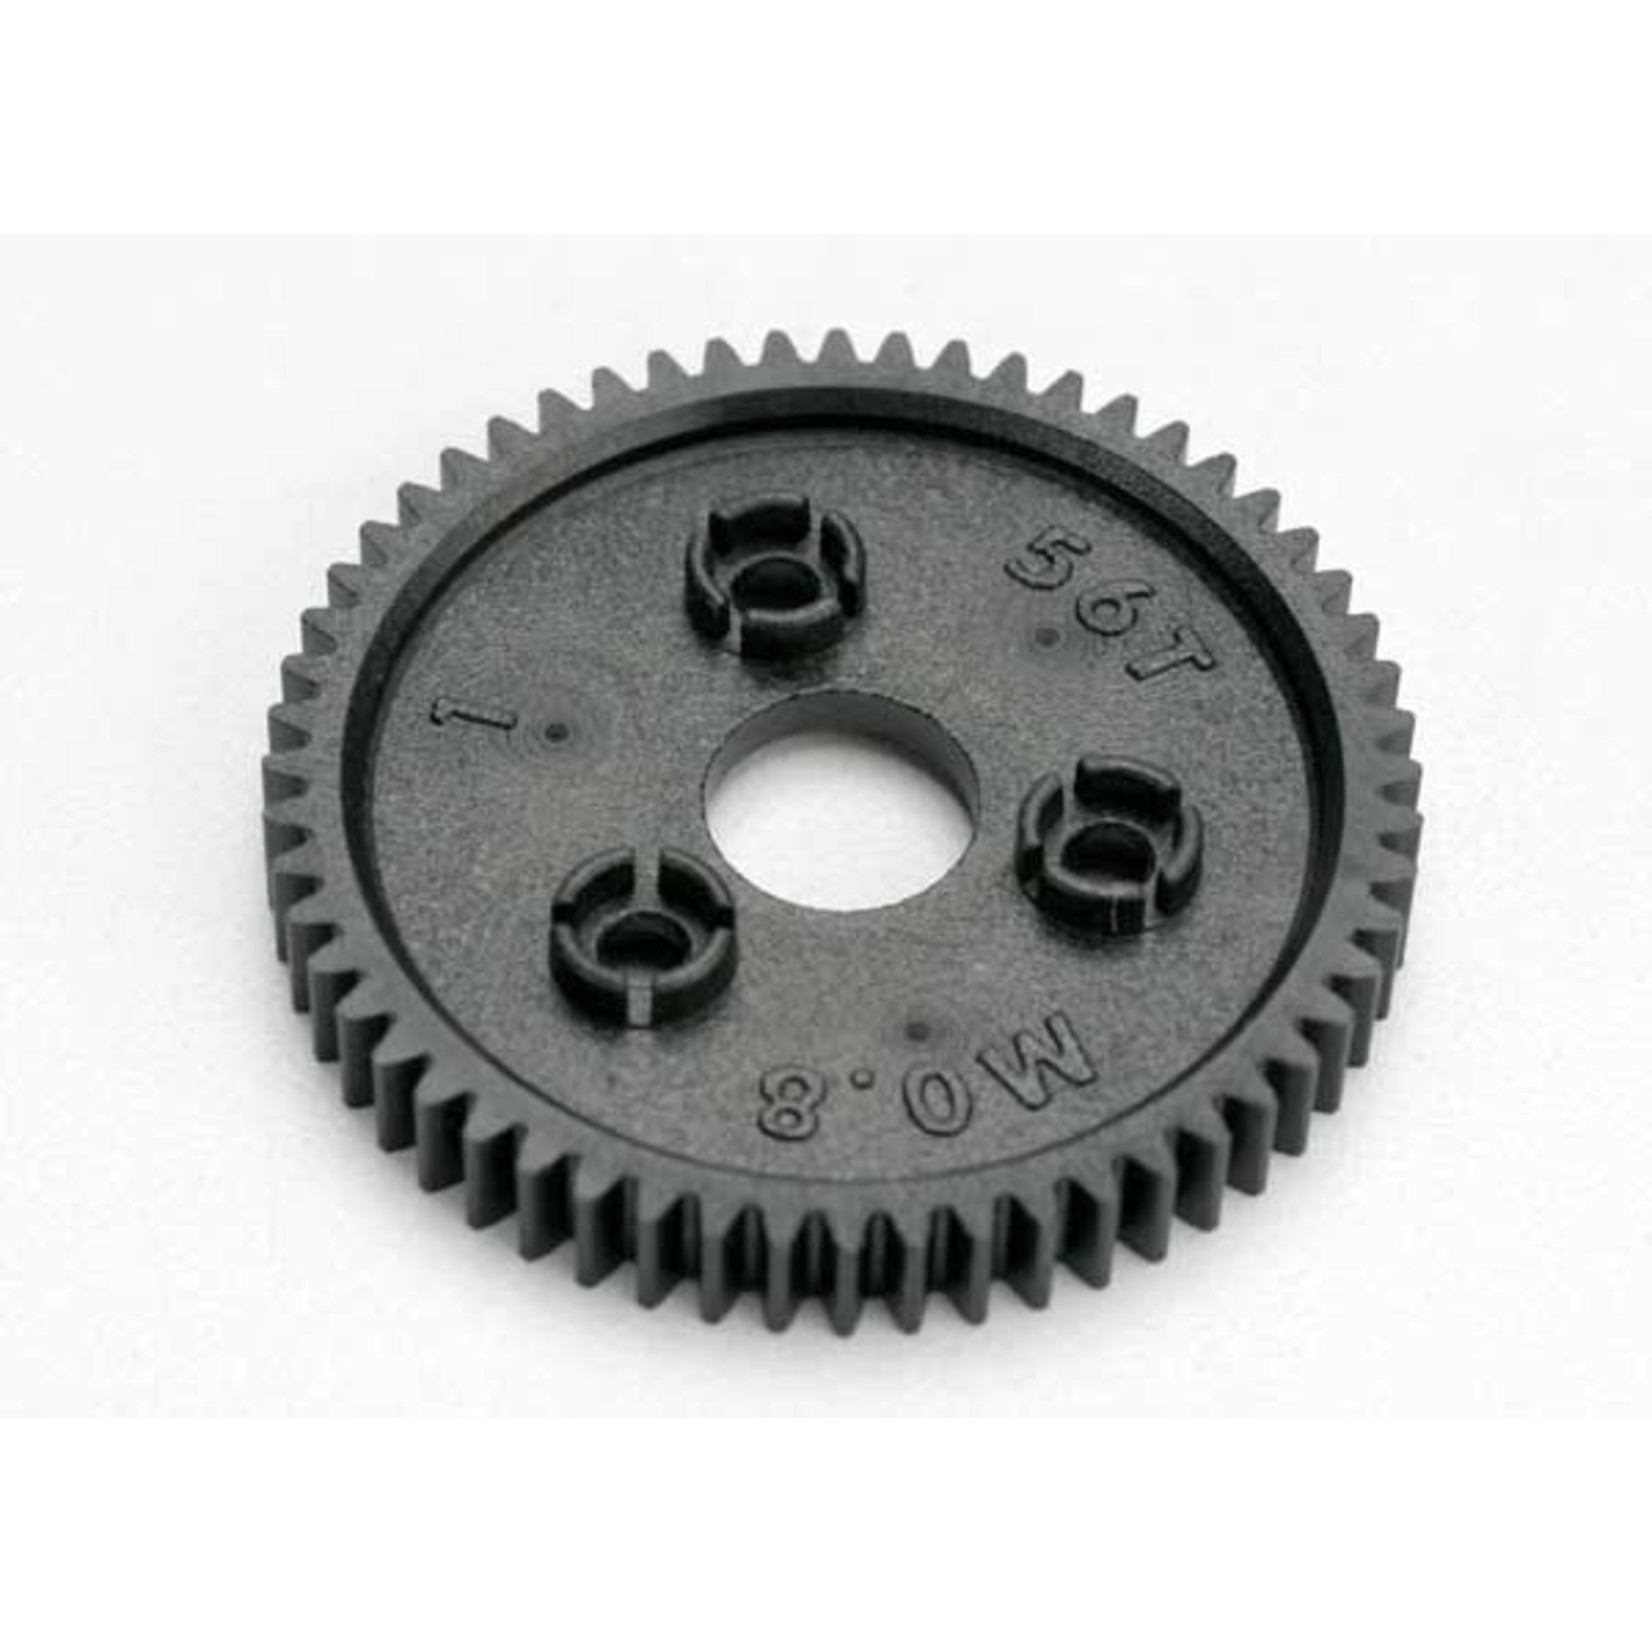 Traxxas 3957 - Spur gear, 56-tooth (0.8 metric pitch, comp